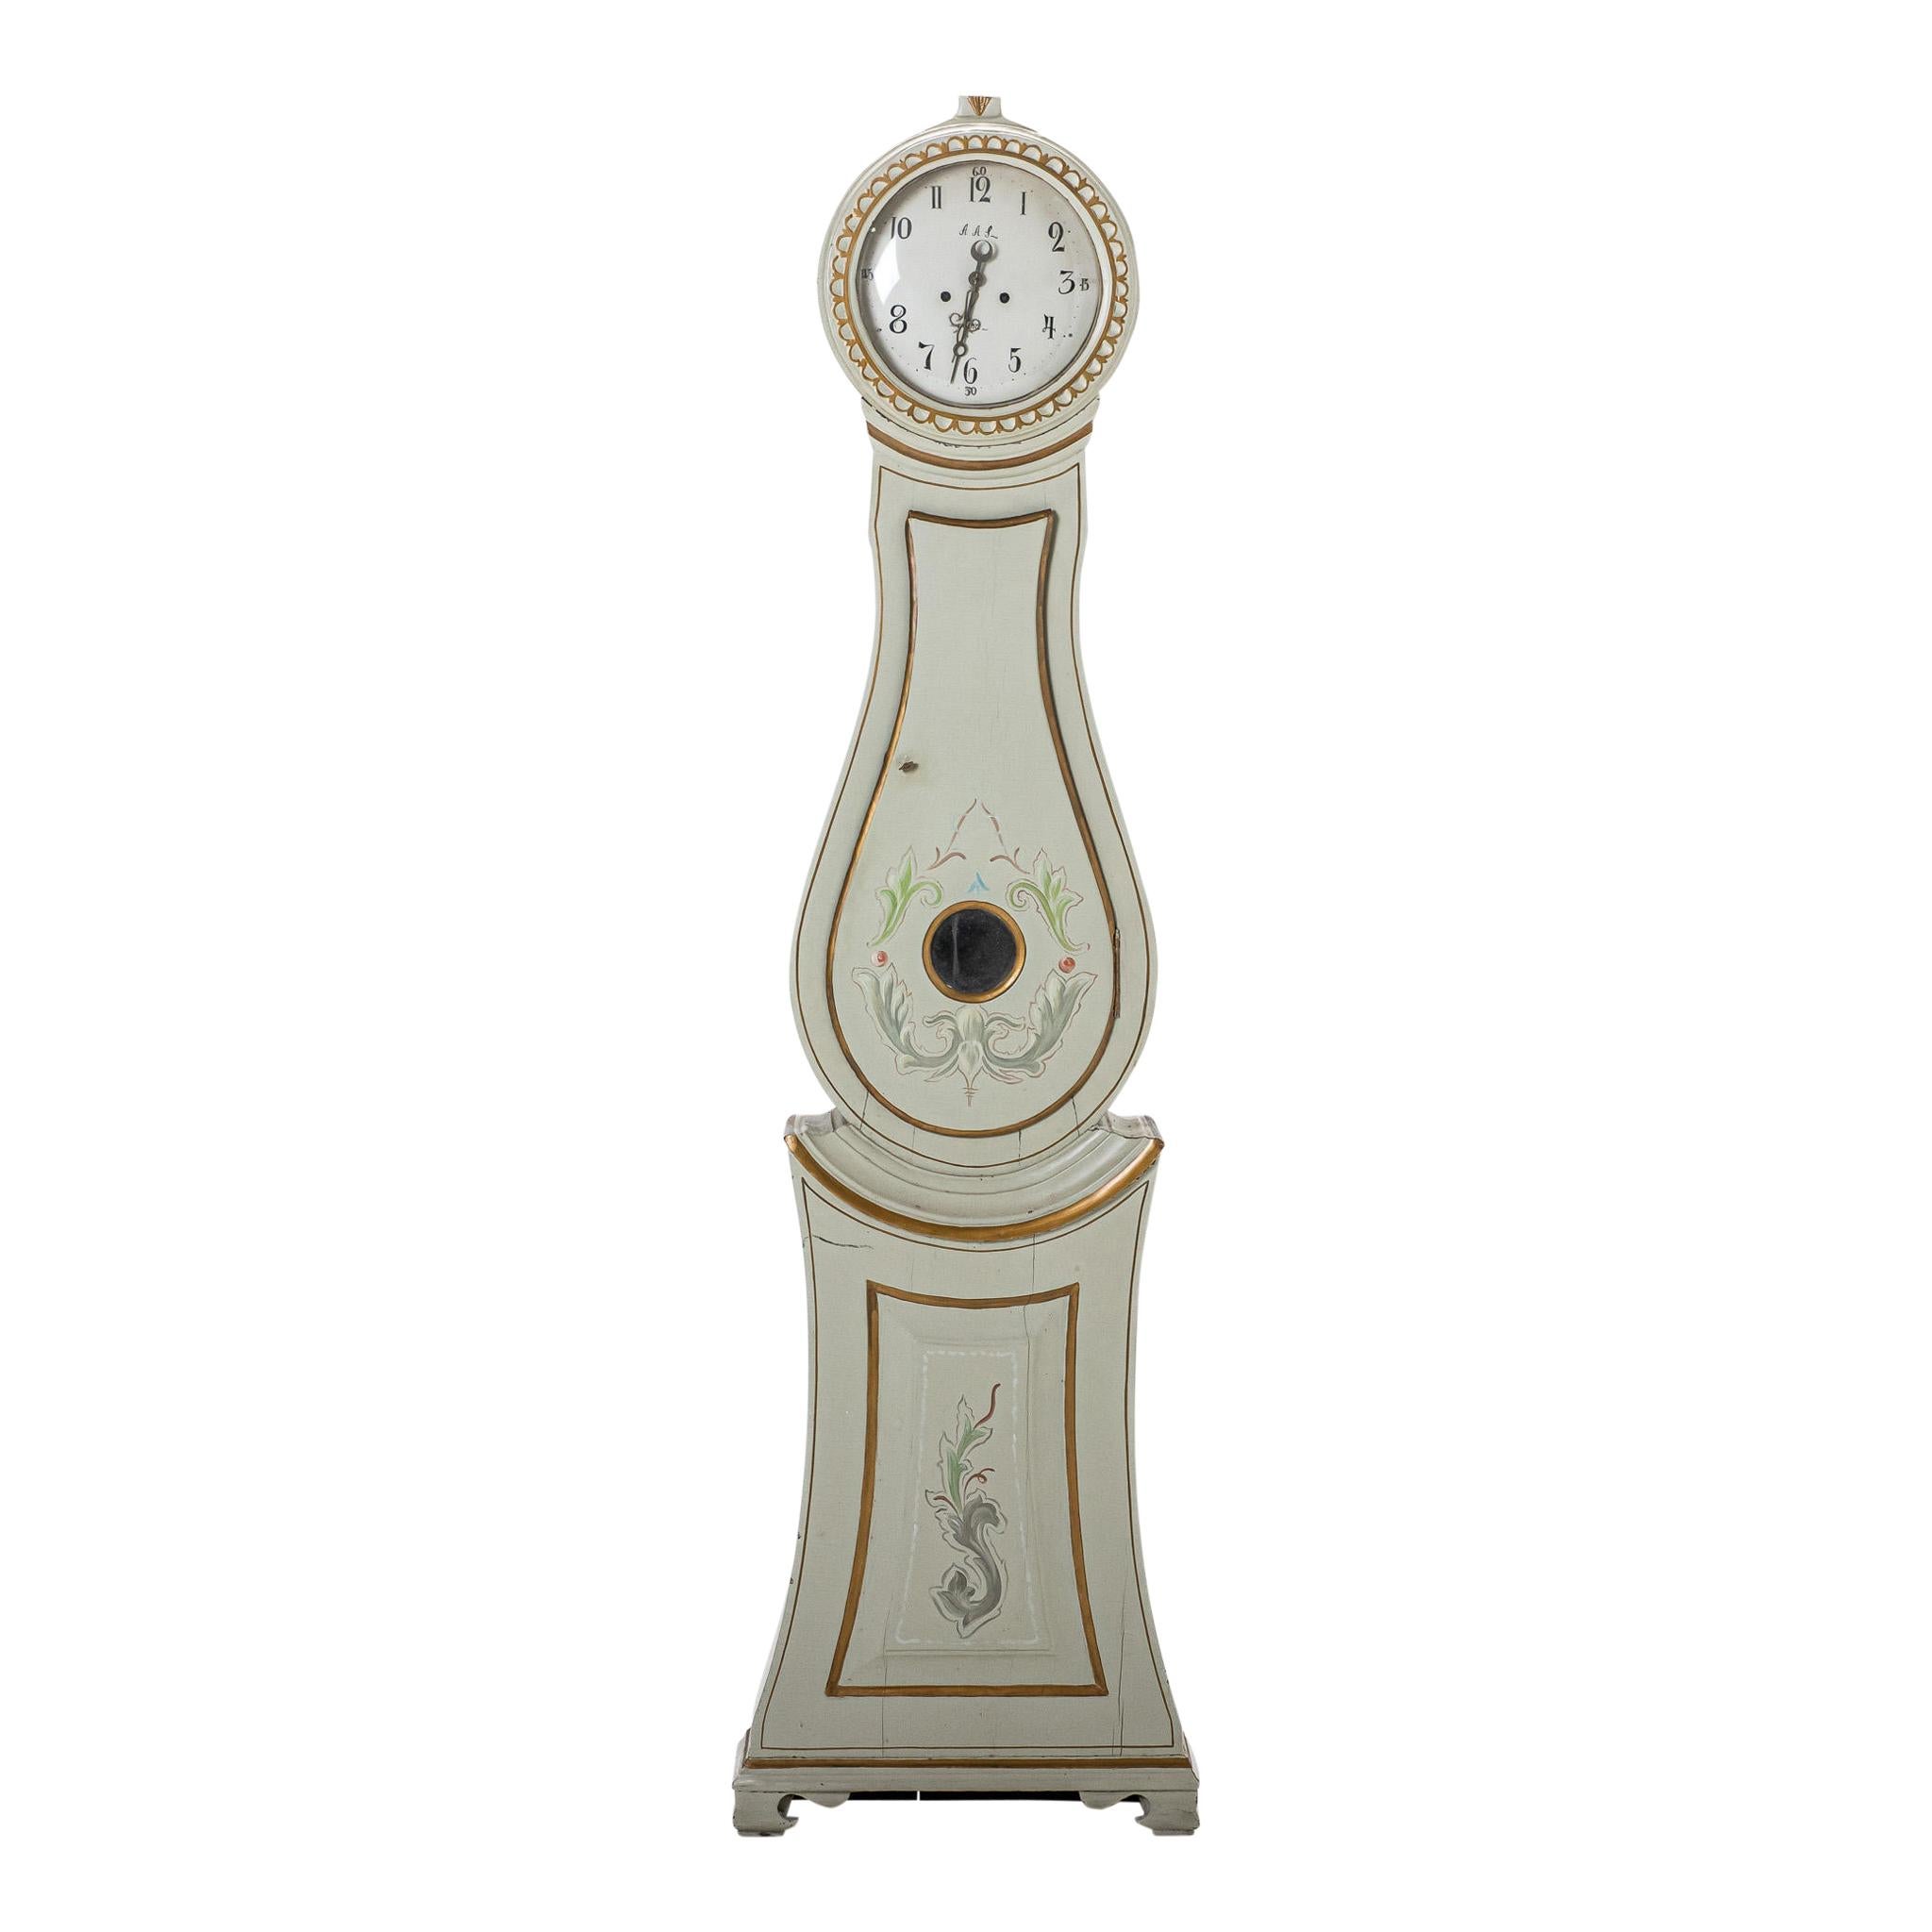 Antique Mora Clock 1800s with original floral paint details and gilding. Face inscribed AAL. Original longcase clock mechanism with weights and pendulum. 
Measures: Height: 206cm/81